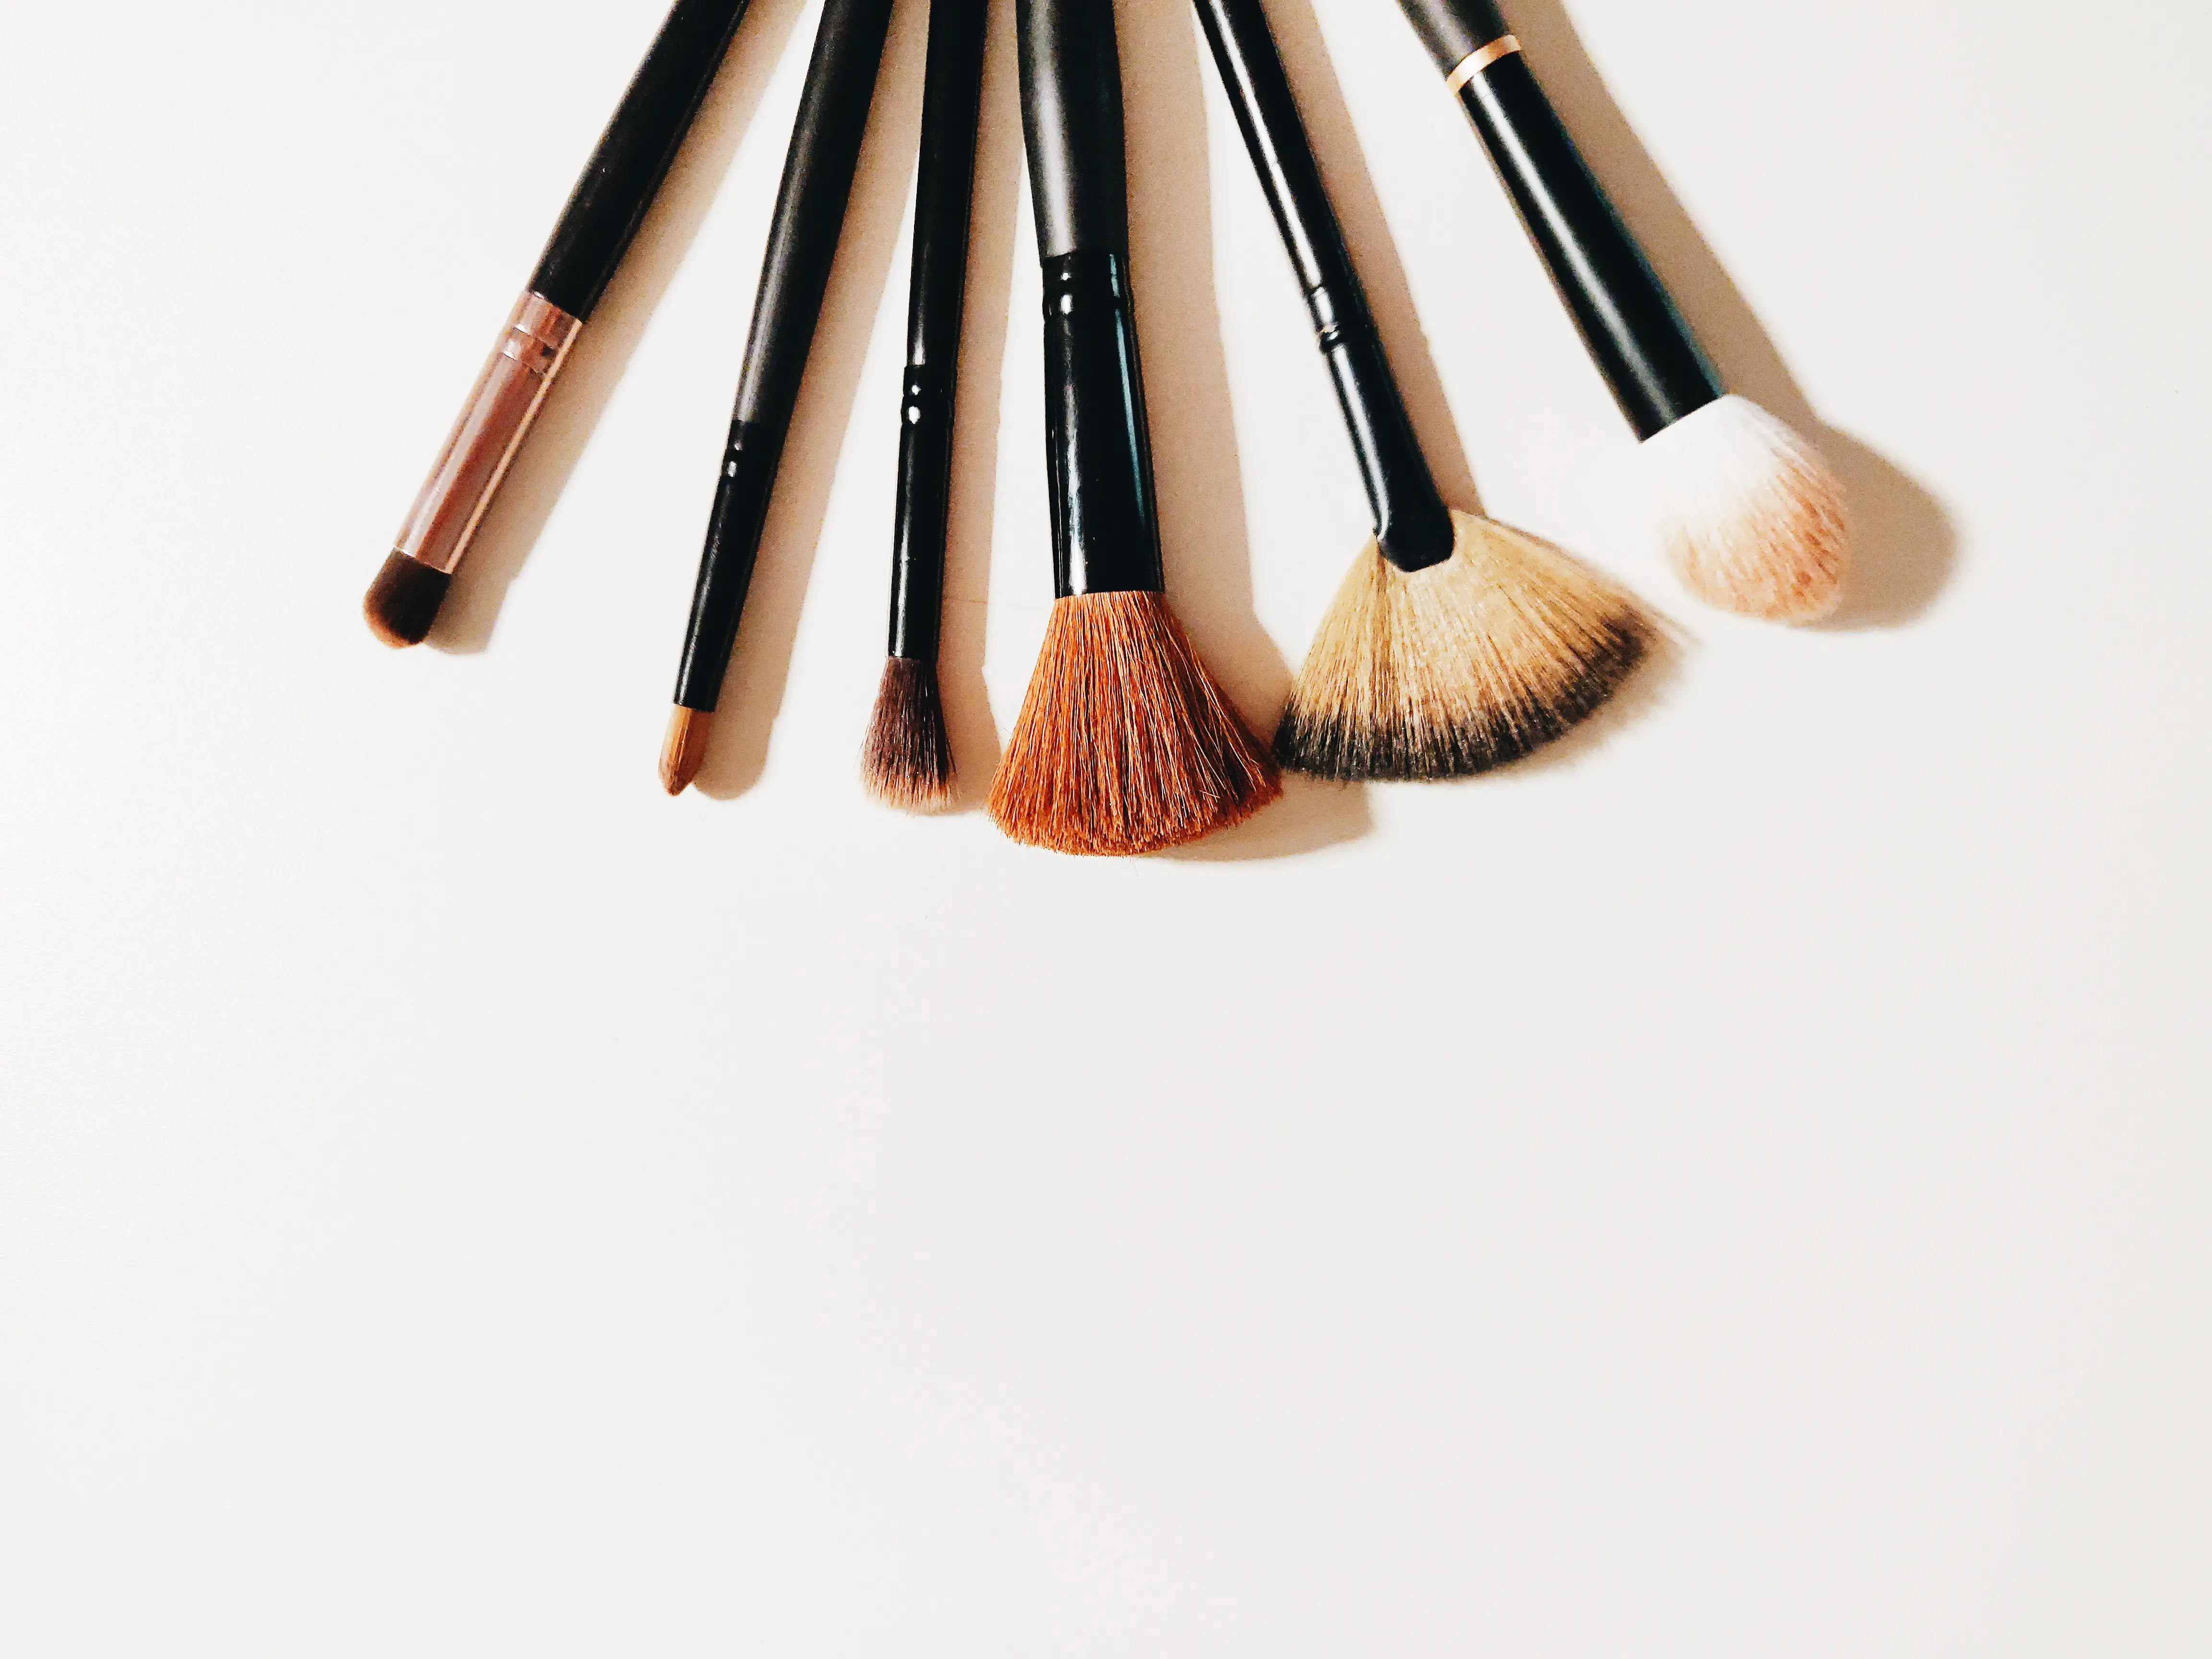 An in-depth review of the best makeup brush sets available in 2019. 